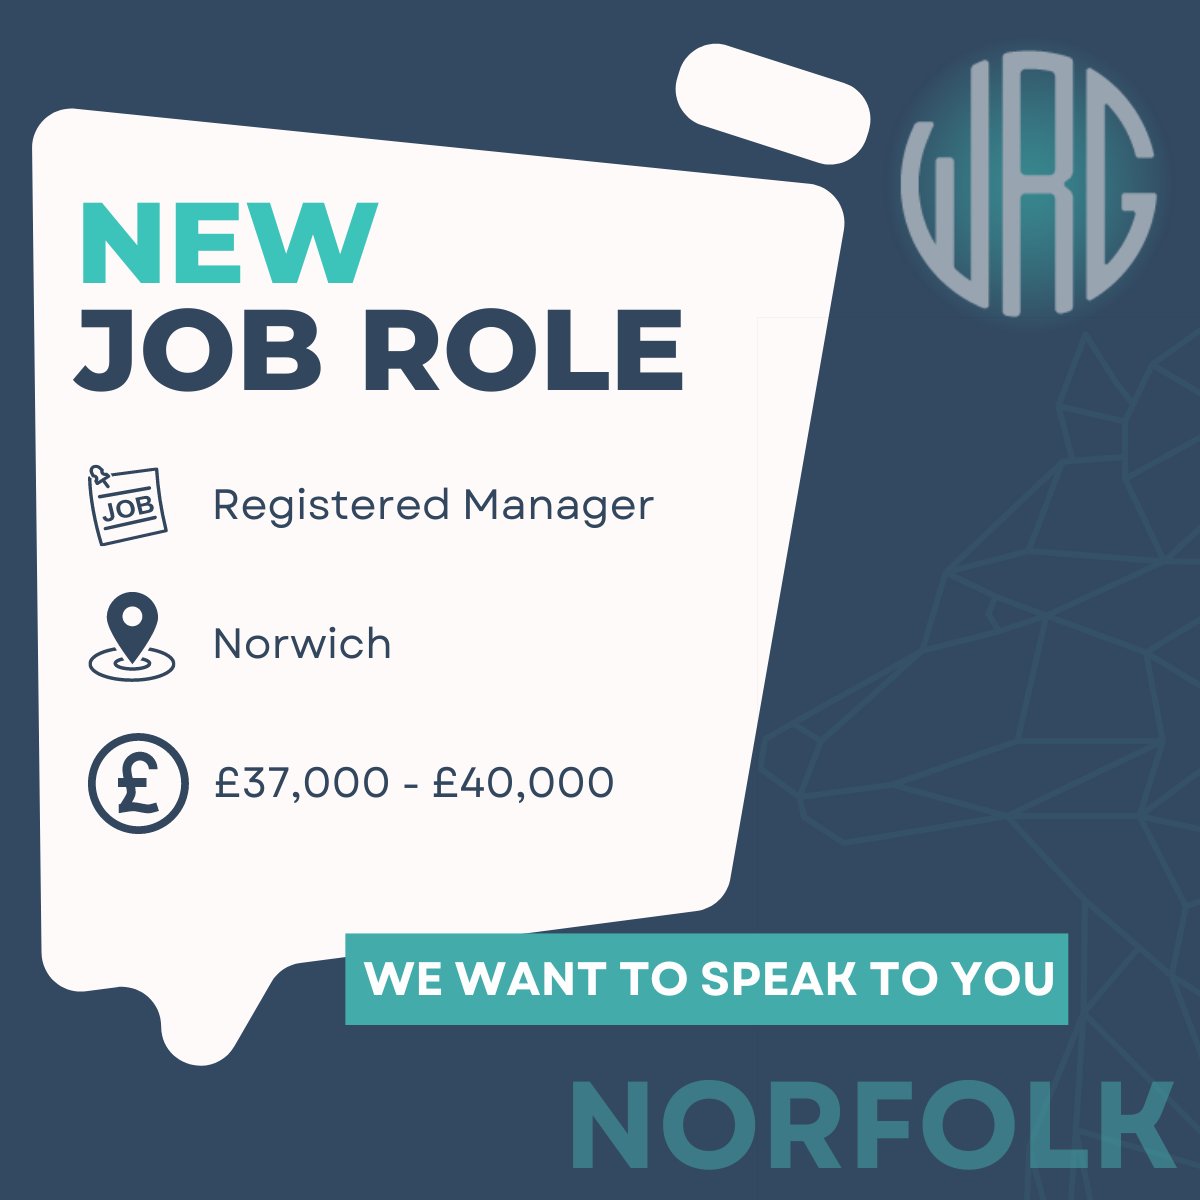 ⭐️Registered Manager
📍Norwich
💰£37,000 - £40,000 per annum
✔️Full-time permanent contract

Click here to apply now! adr.to/r4jtuai

 #NorwichJobs #RegisteredManager #UKHealthandsocialcare #adultsocialcare #makeadifference #wolfcare #wolfjobs